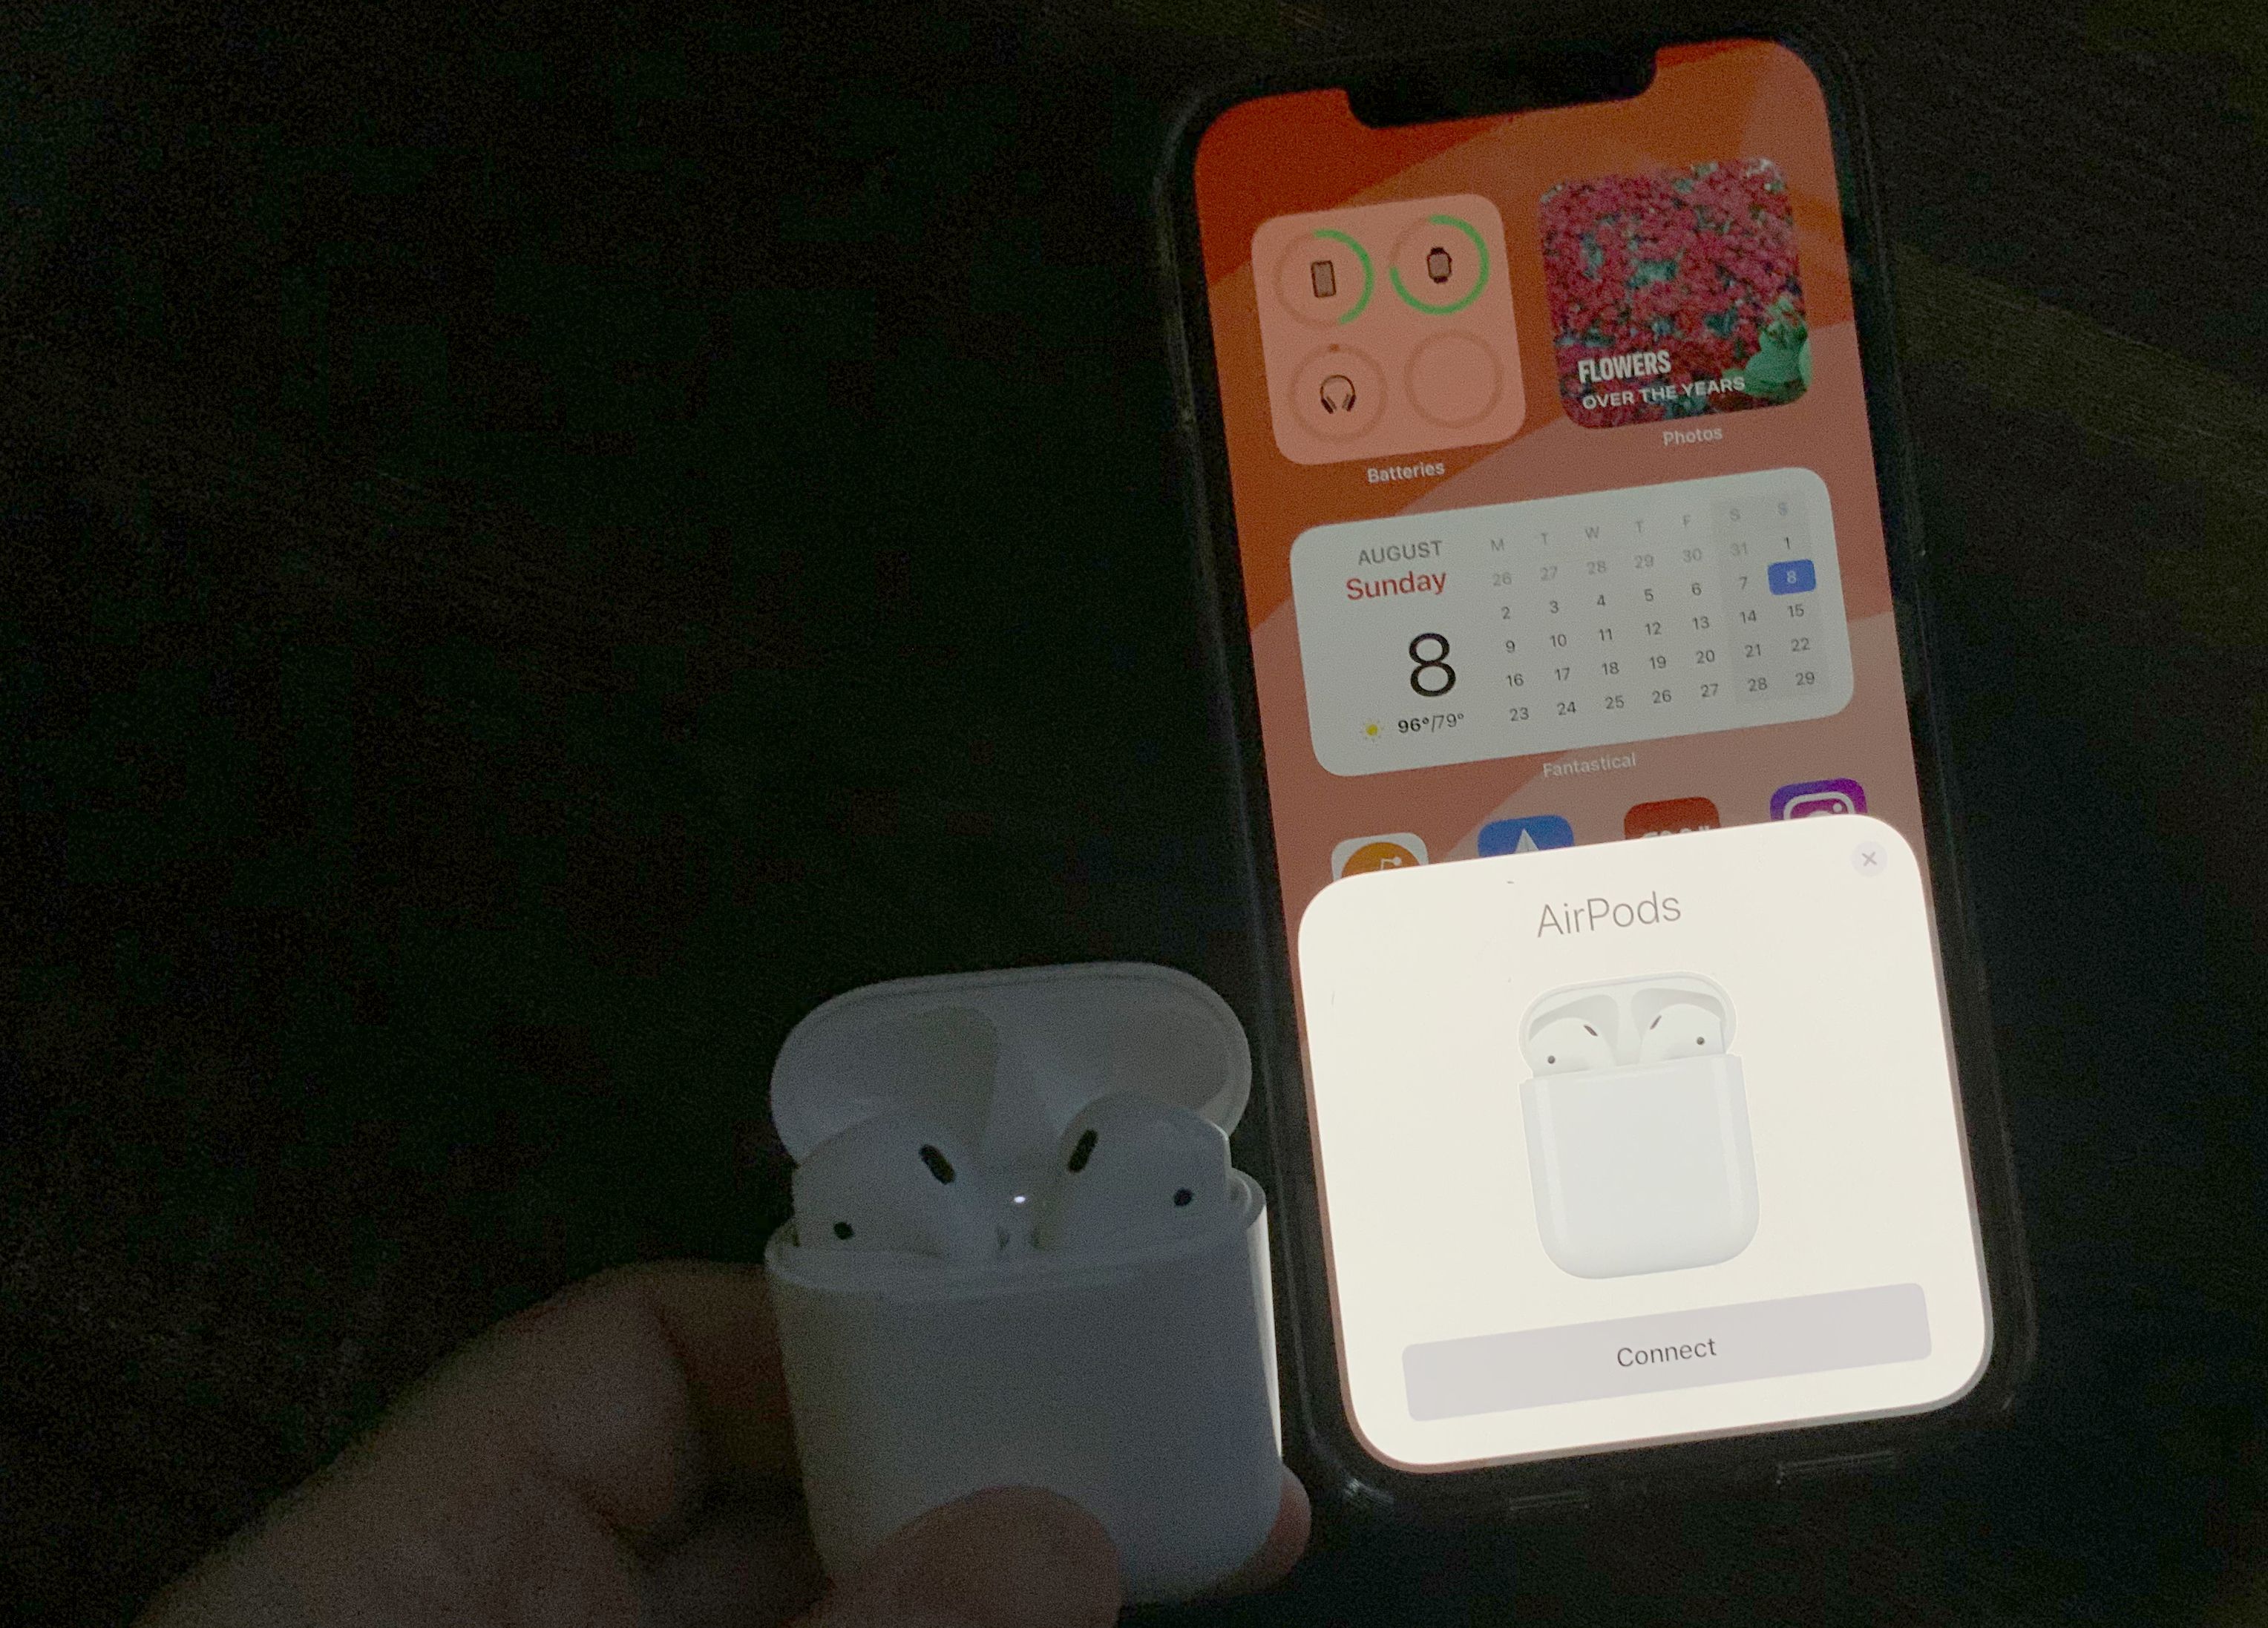 AirPods connect screen on iPhone